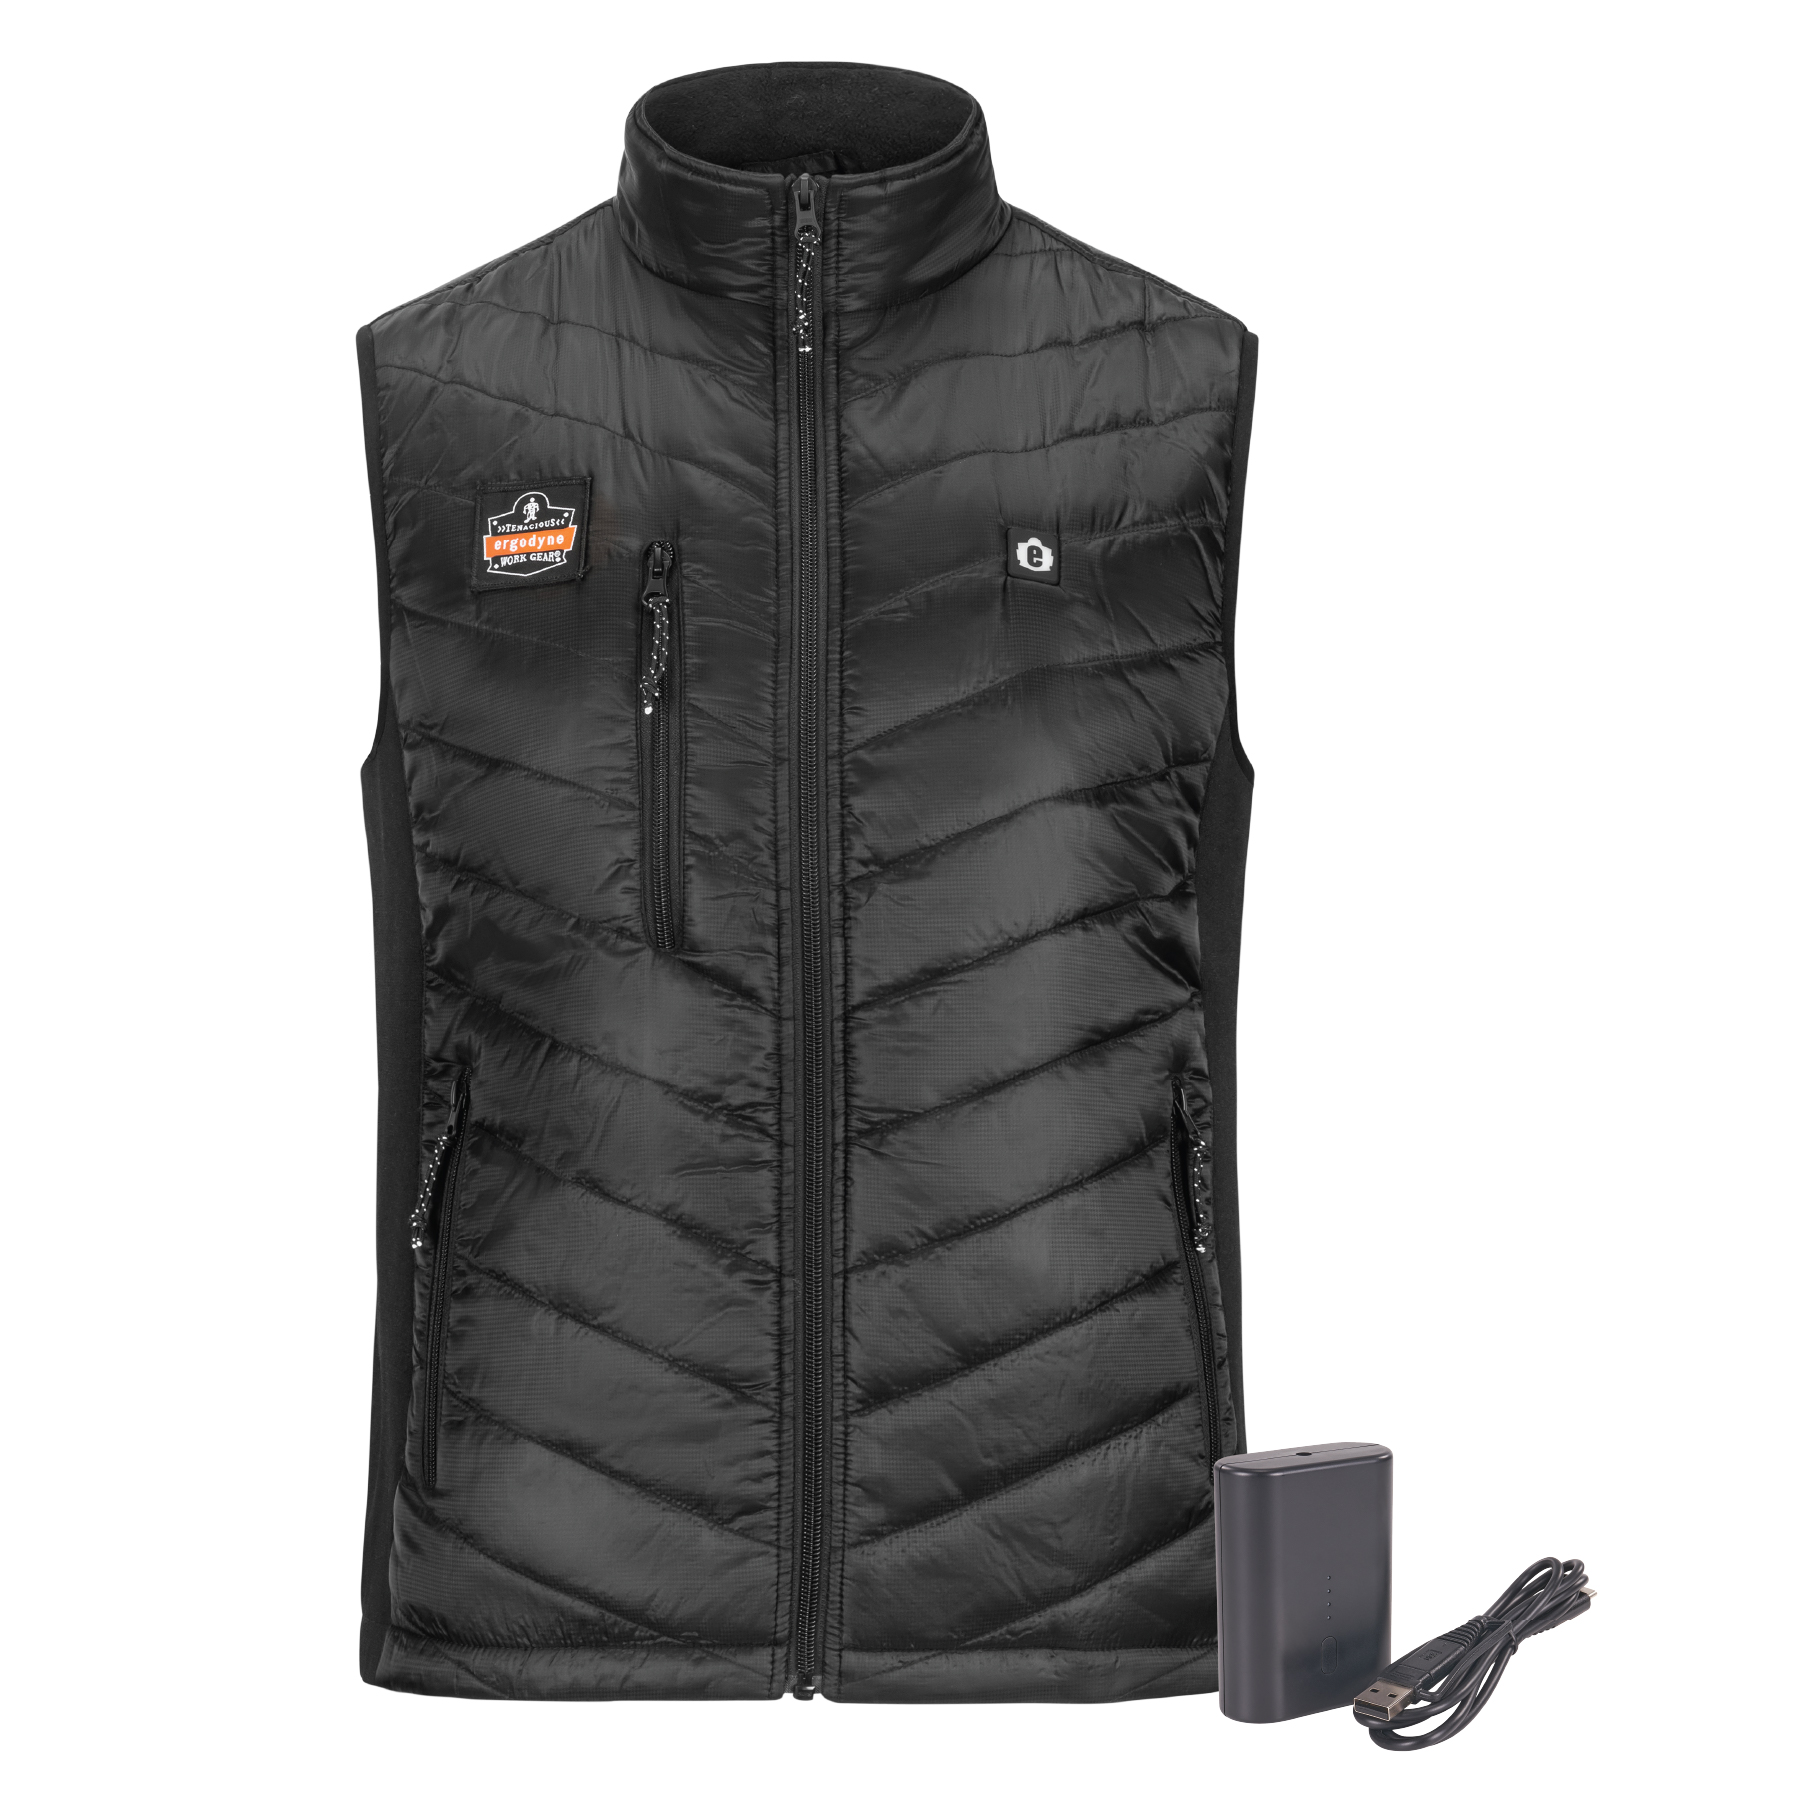 Rechargeable Heated Vest